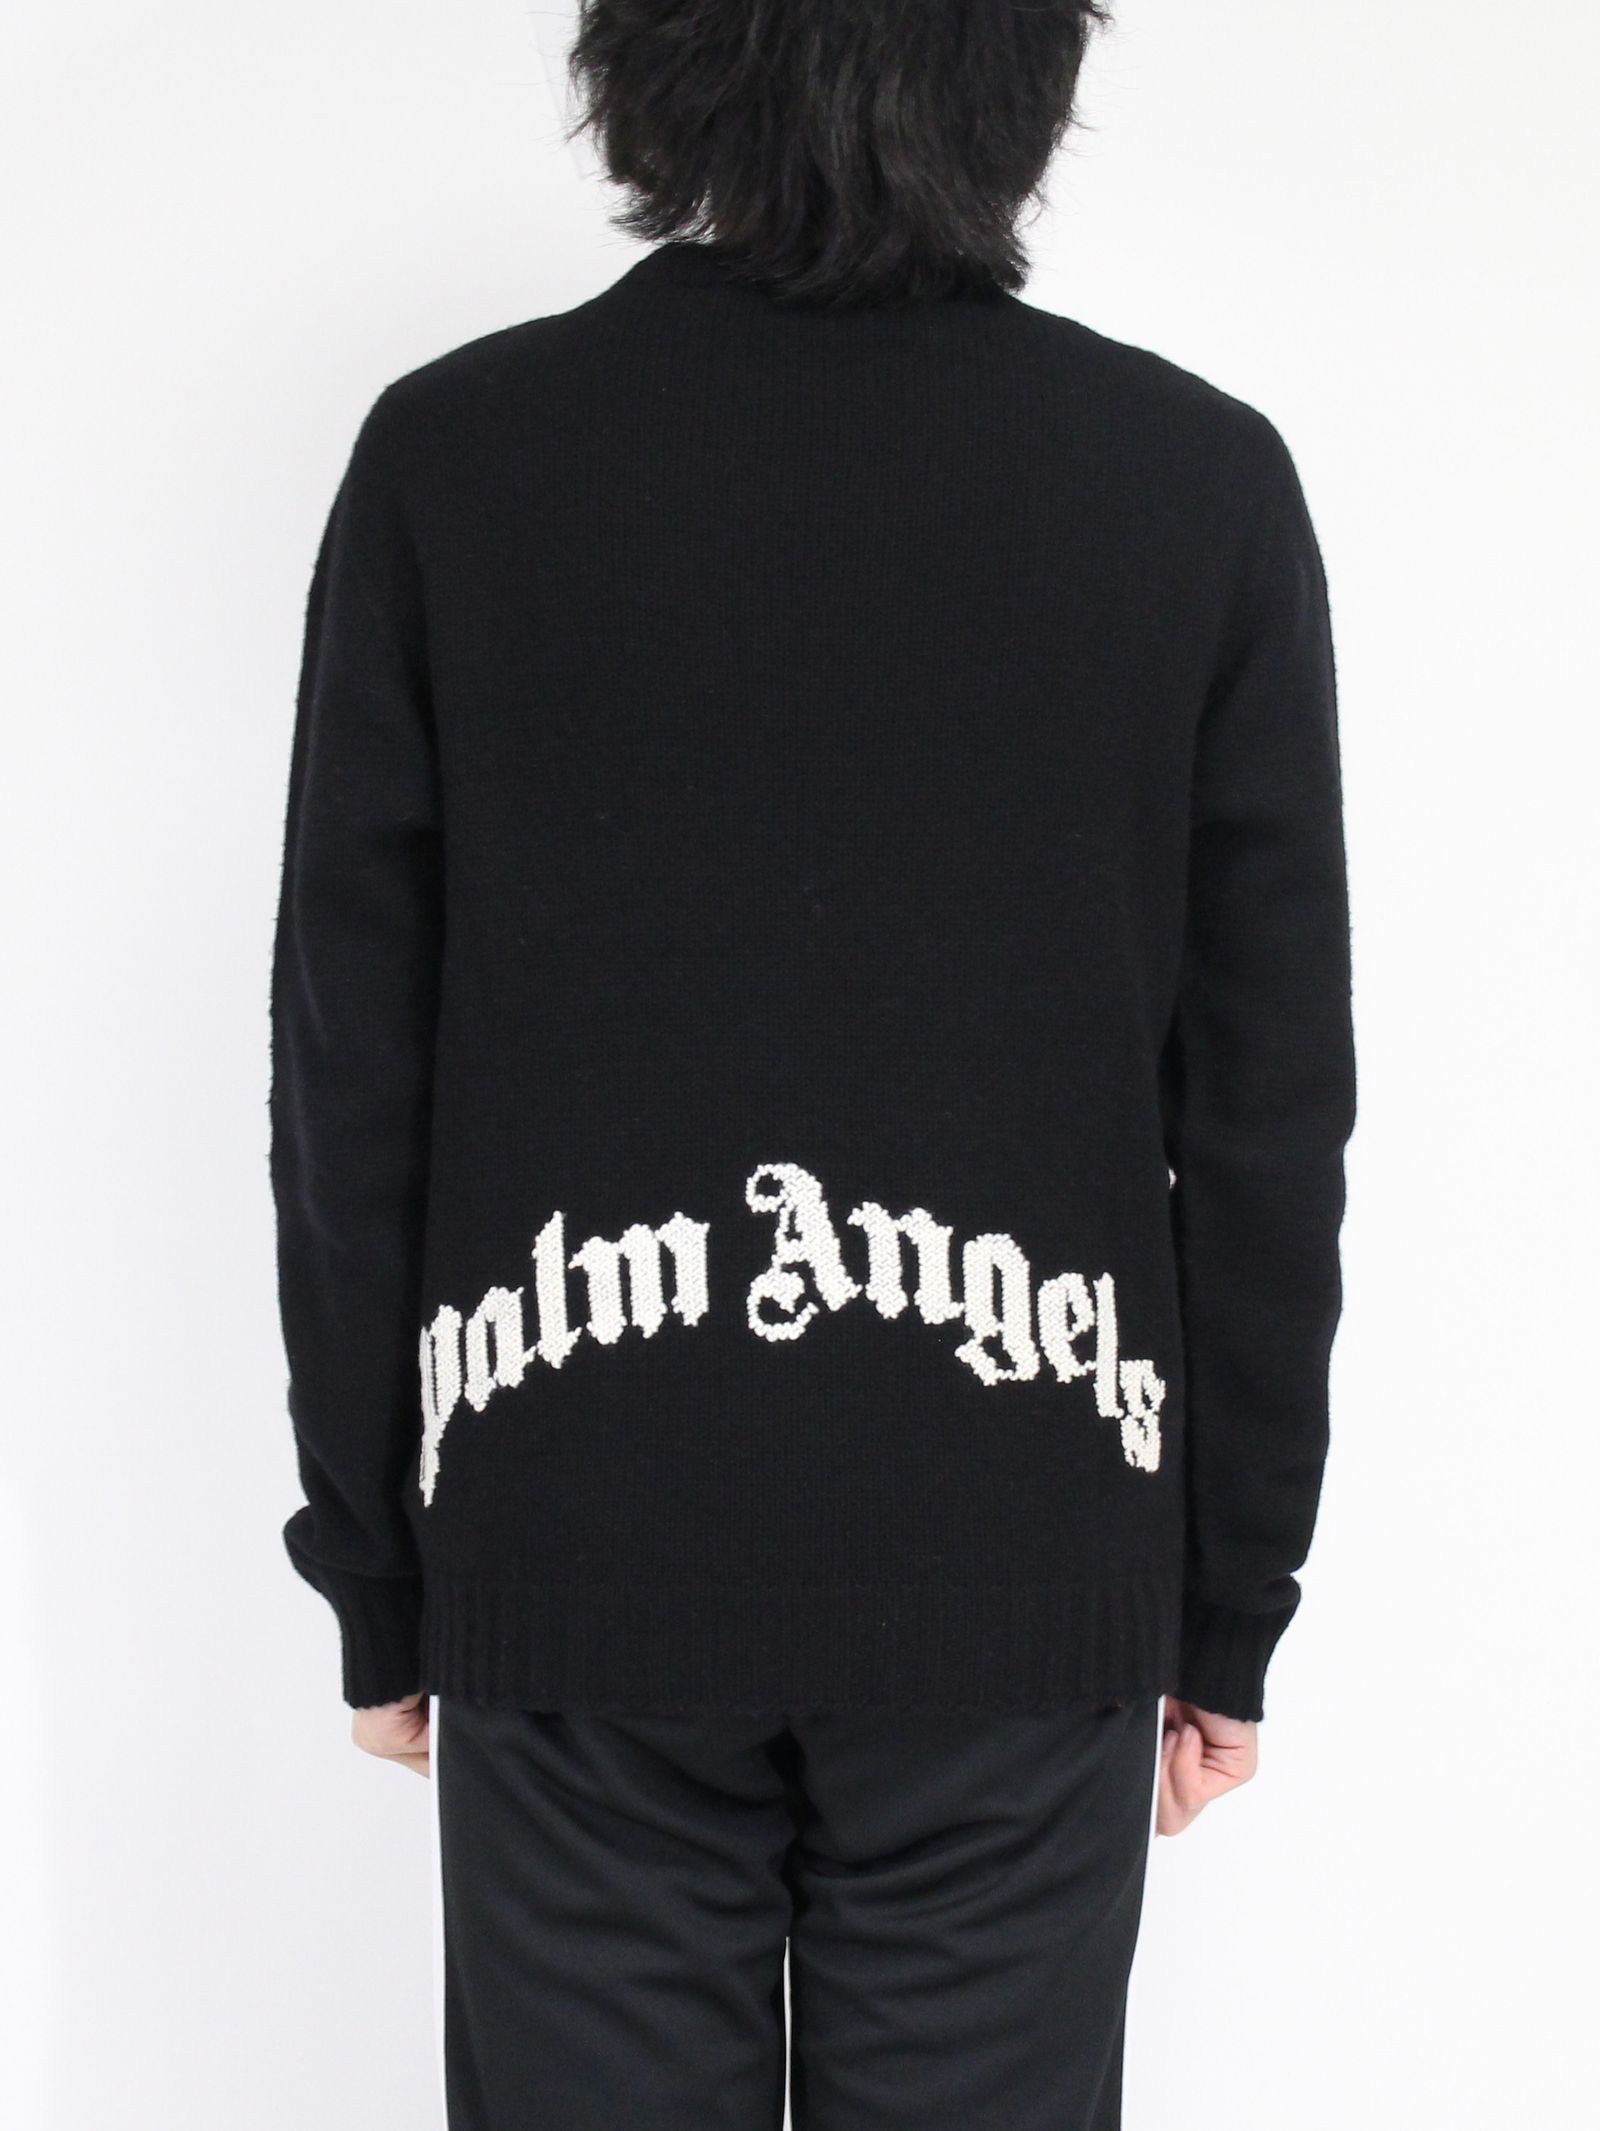 PALM ANGELS - 2020 AW | STORY